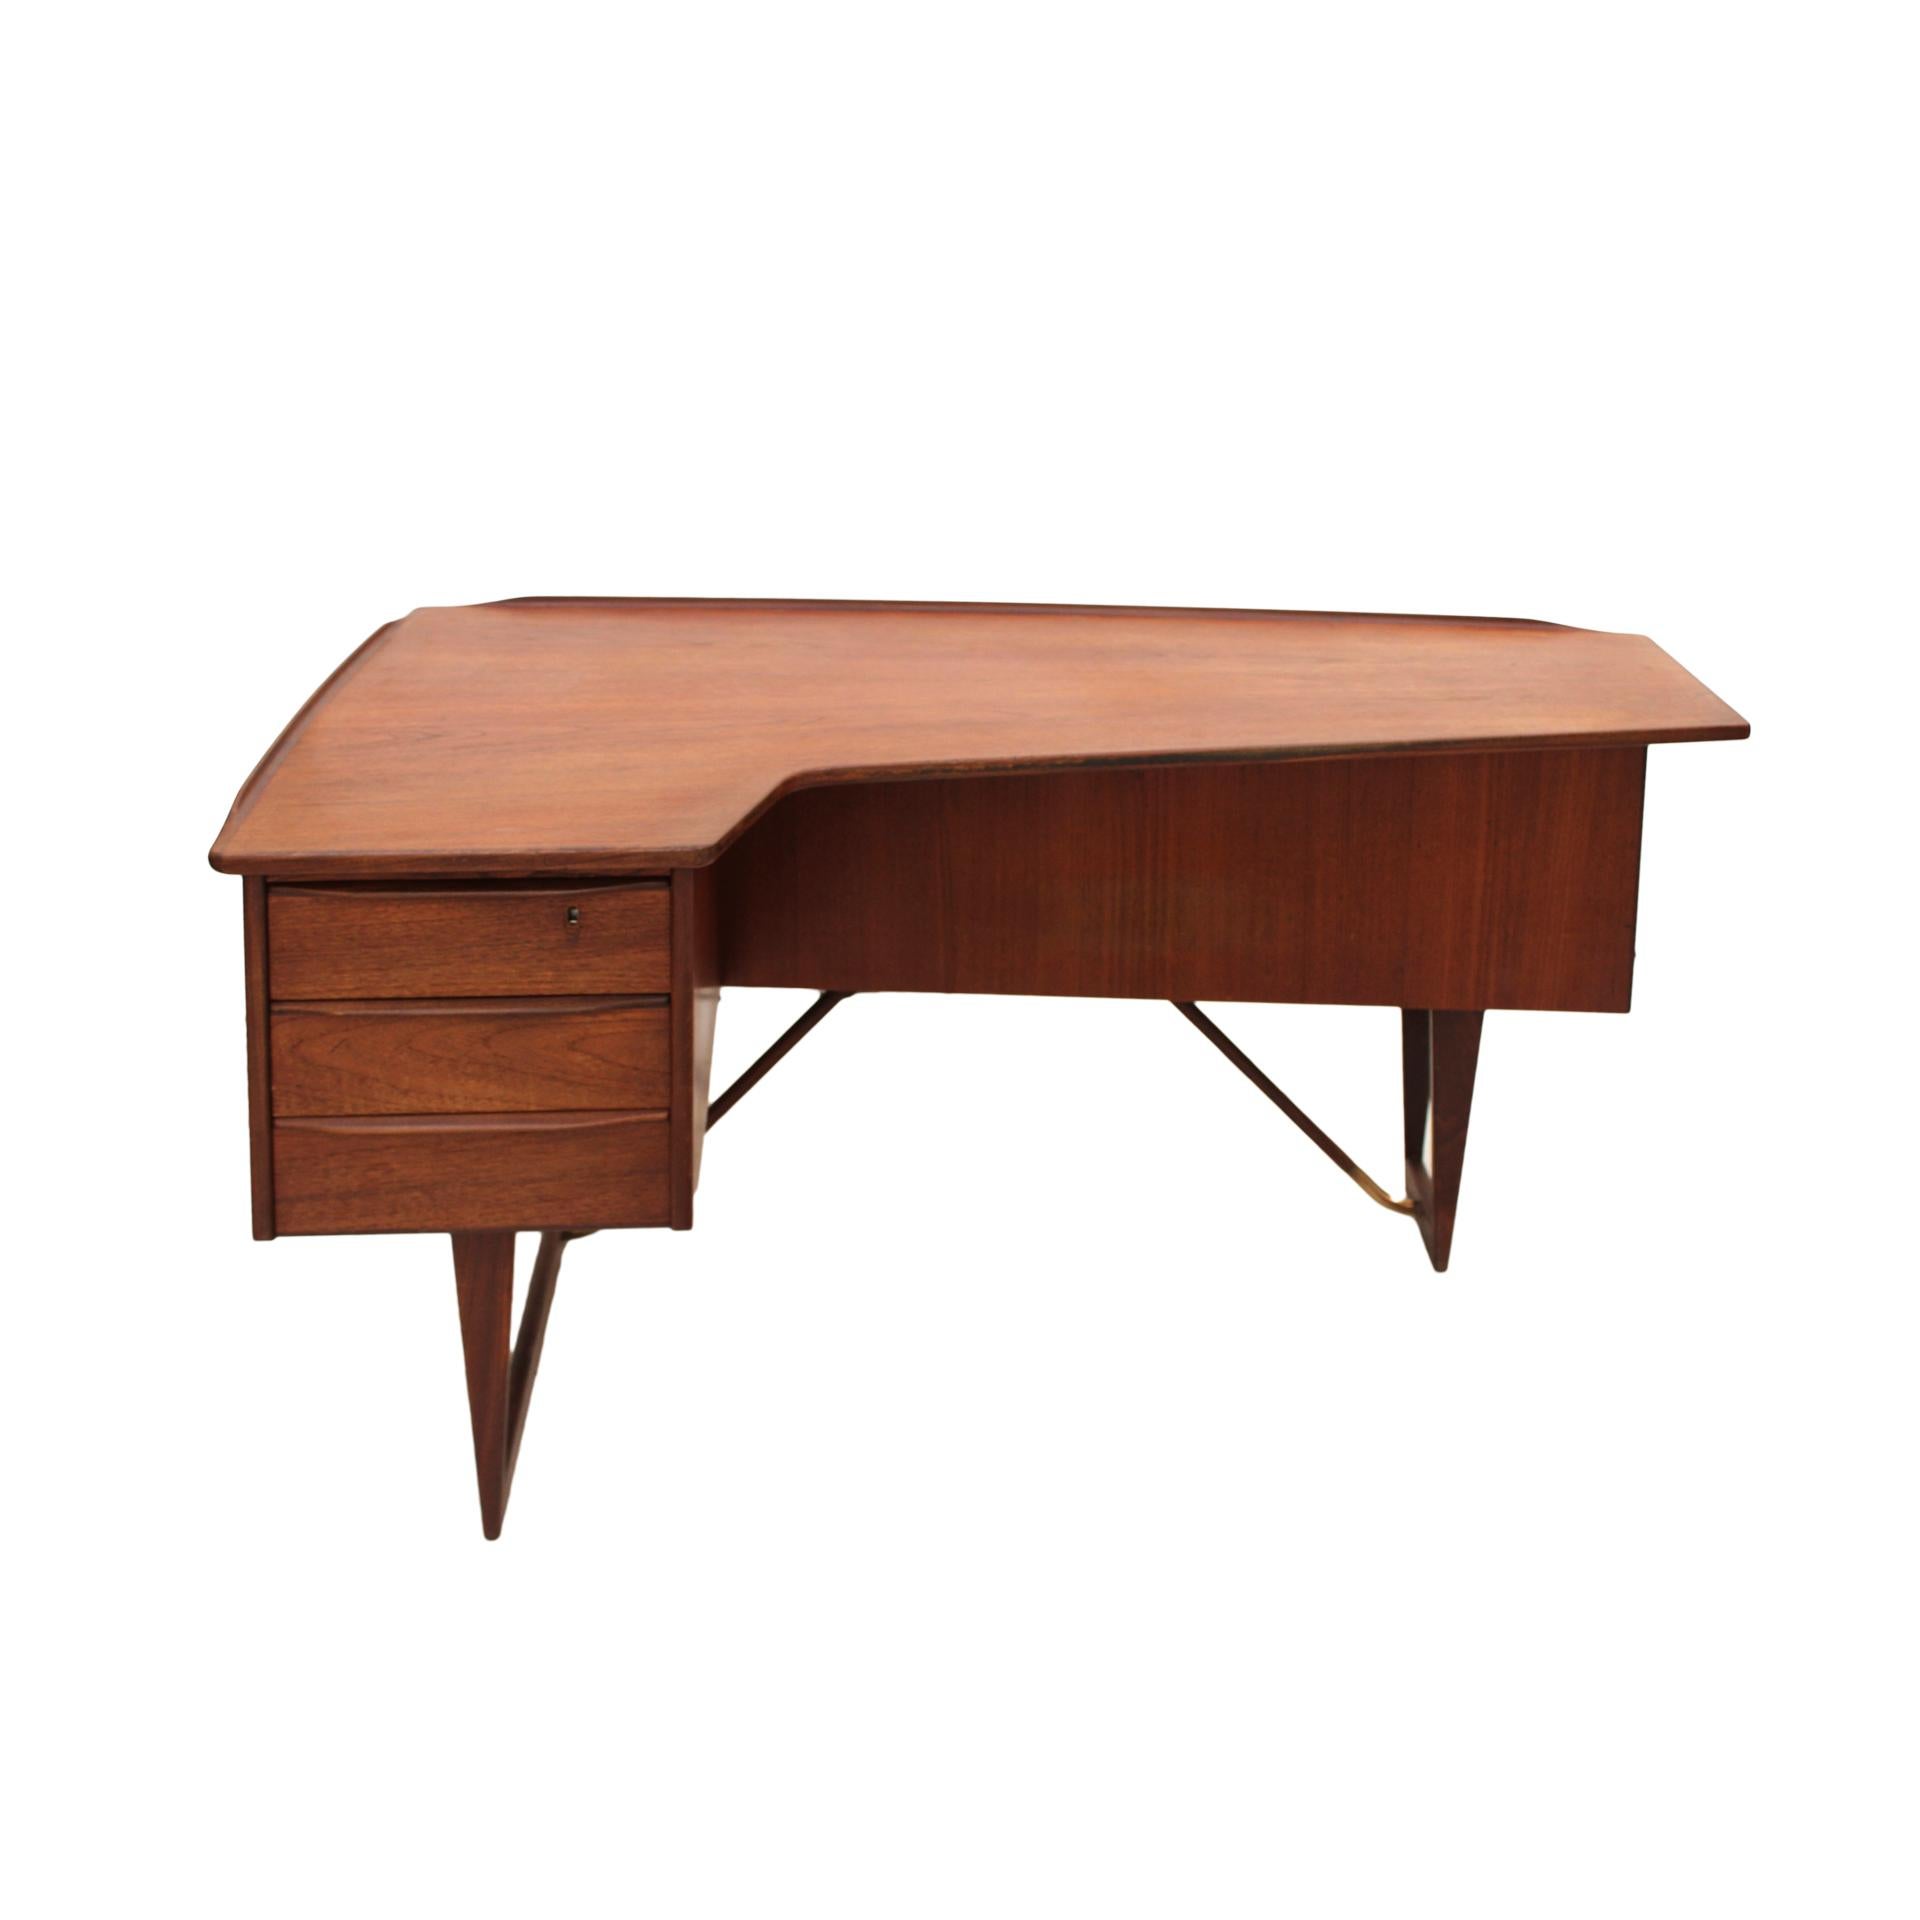 Boomerang desk designed by Arne Vodder. Solid teak wood structure and brass details on the legs. Composed of three drawers and a folding door. Denmark, 1960s.

Bibliography 
Designmuseum – Danmark Furniture Index

Every item LA Studio offers is